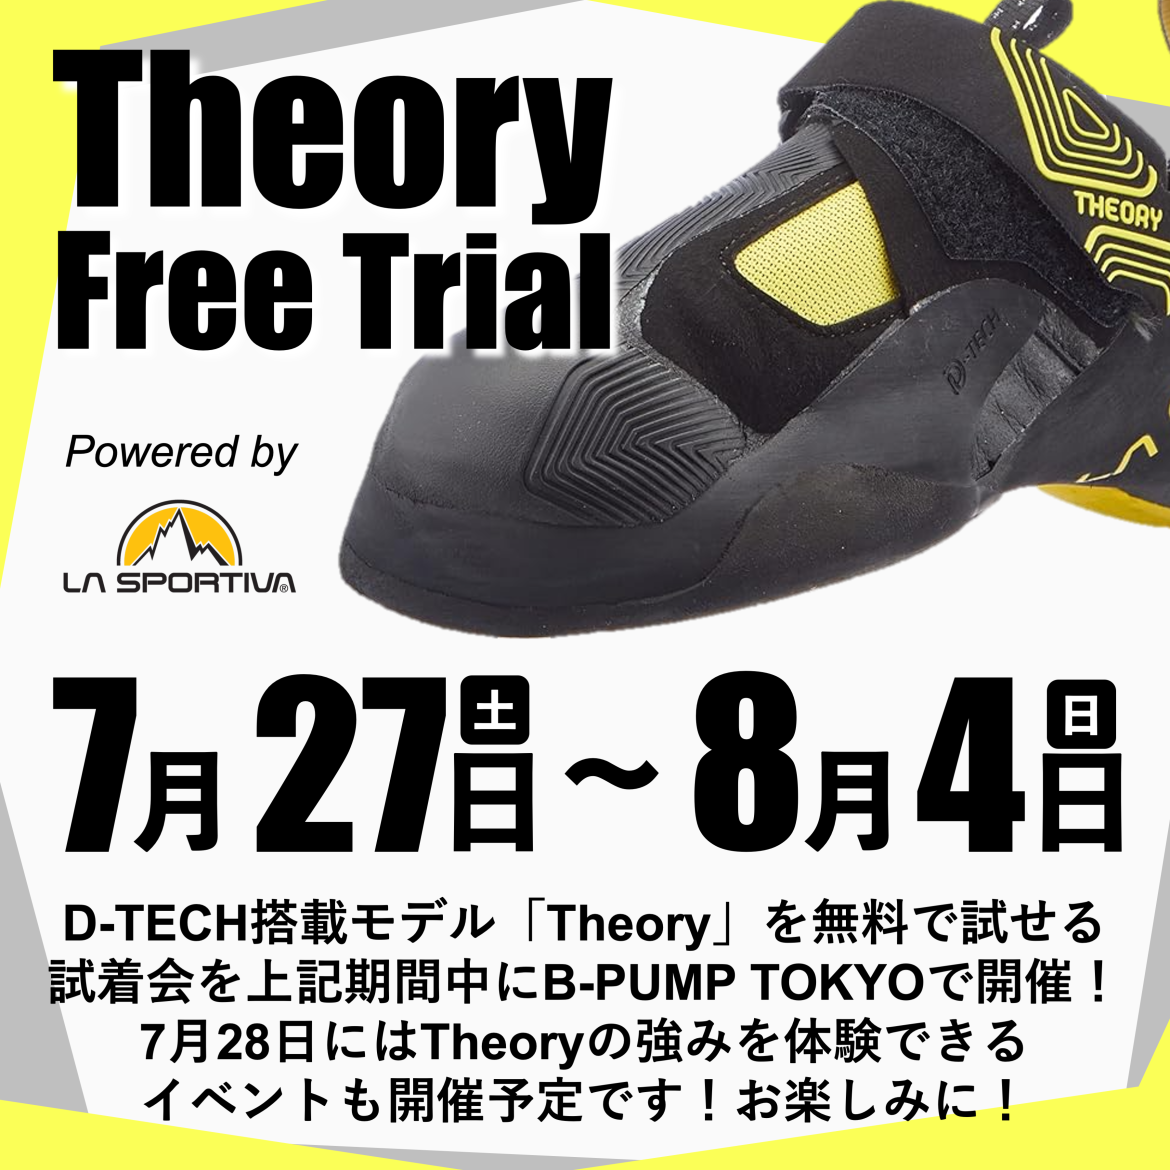 Theory試着会開催！